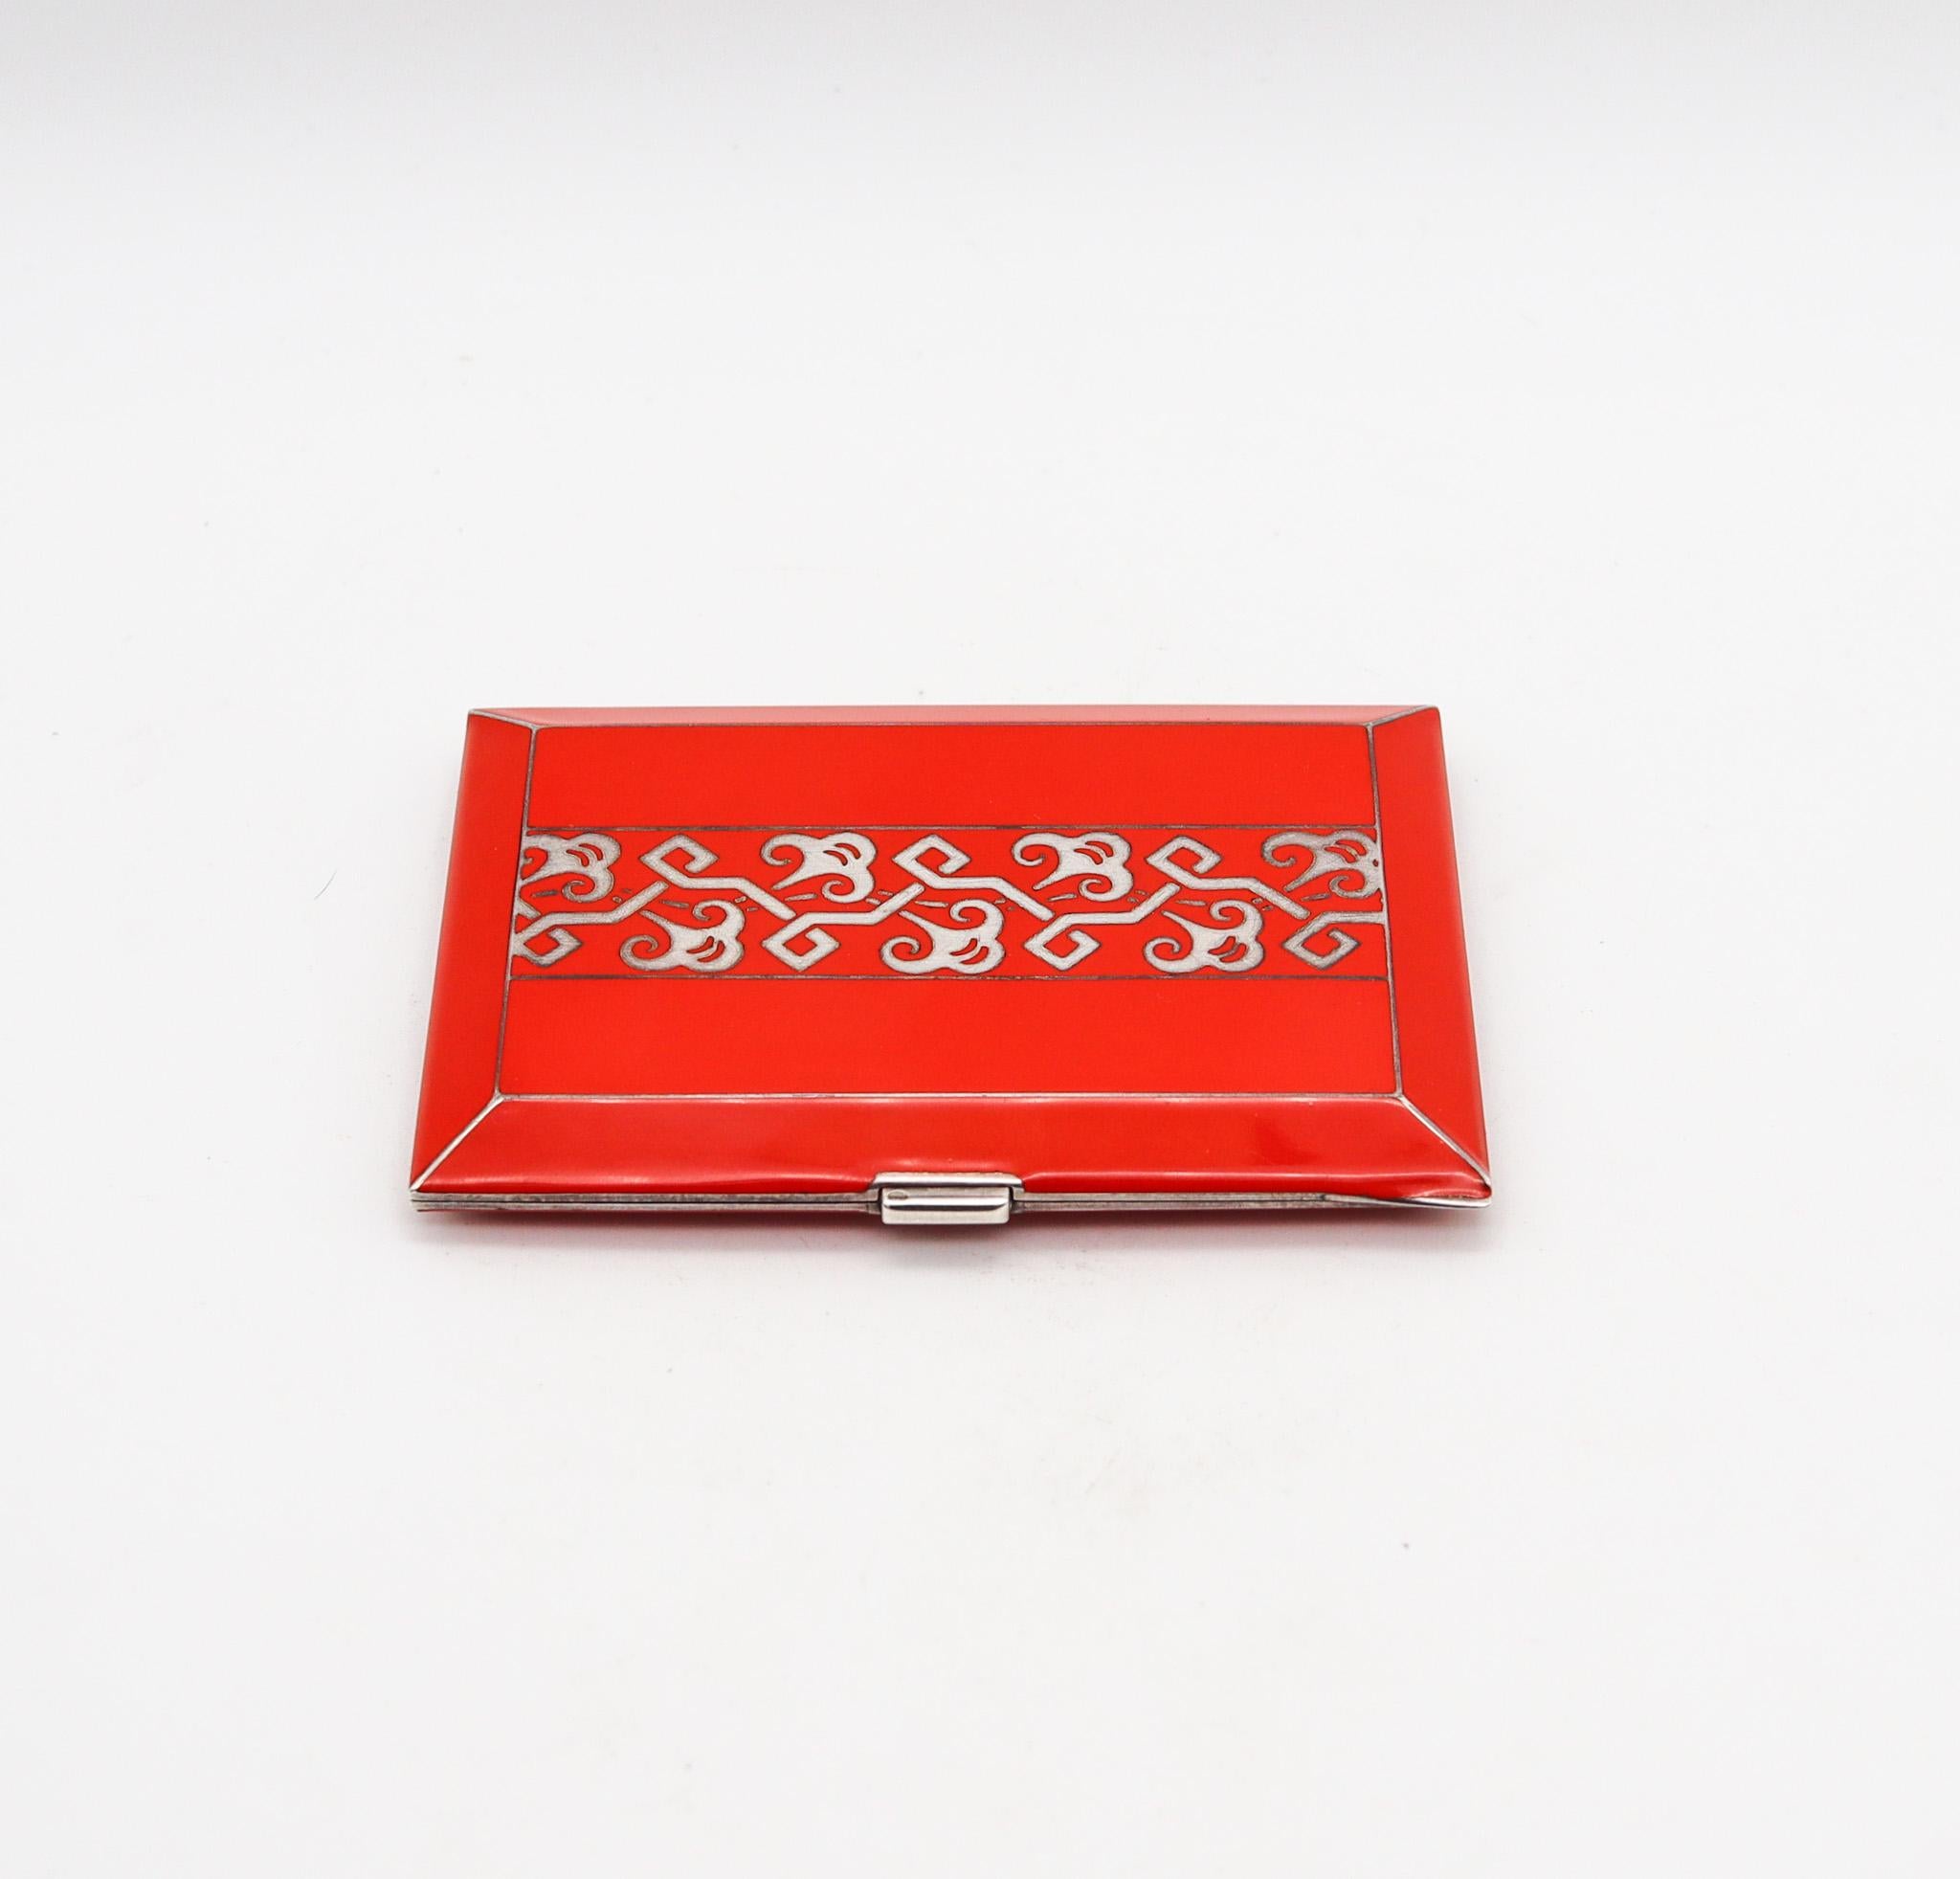 Enamel case designed by Strauss-Allard & Meyer for George Stockwell

Exceptional art deco rectangular case, created in Paris France at the jewelry workshop atelier of Strauss Allard et Meyer, back in the 1925-1926. This piece has been carefully